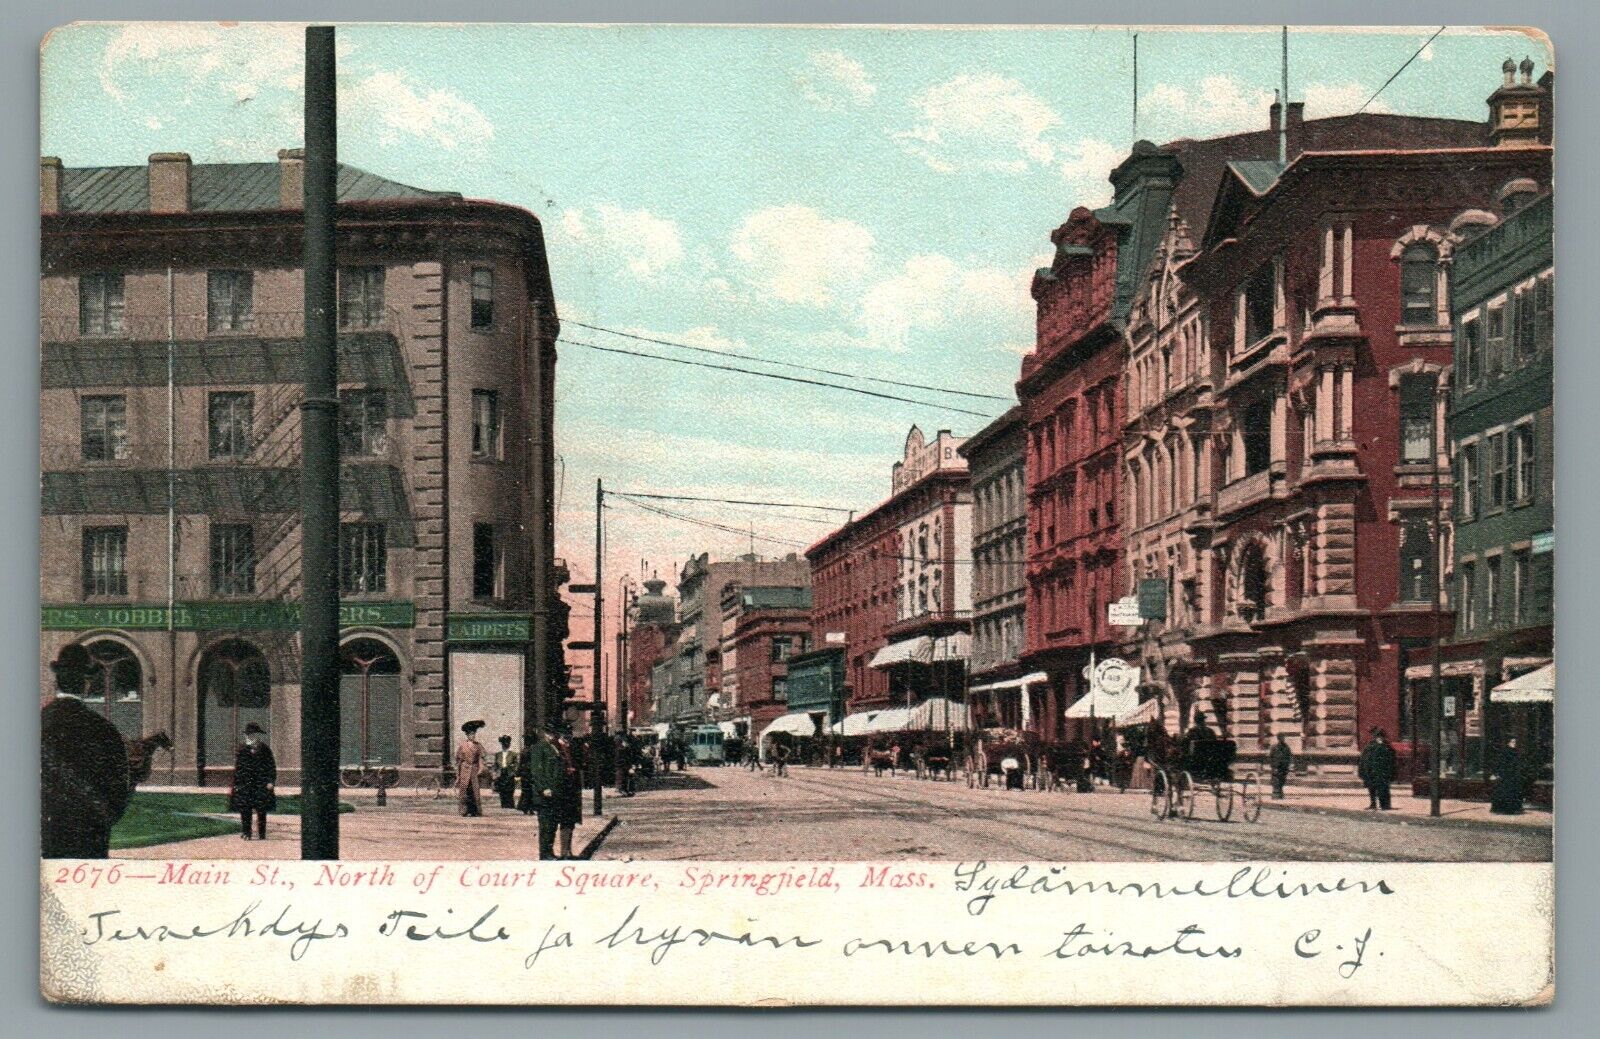 Main St. North Of Court Square View Springfield Mass Vintage Postcard c1902